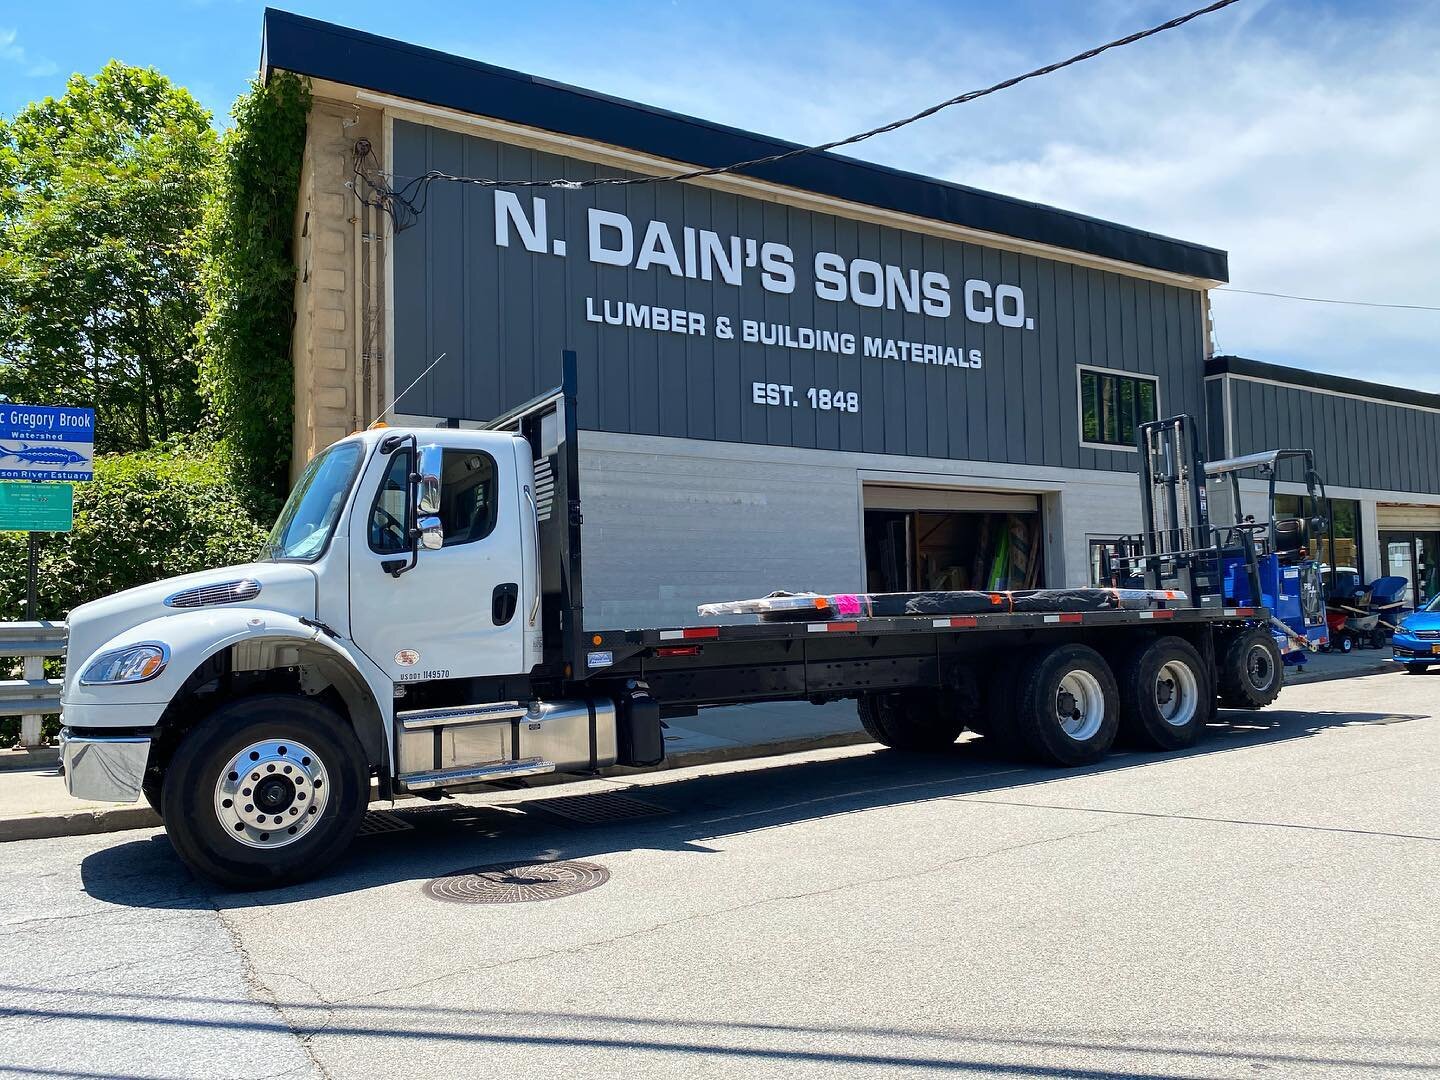 Our newest addition to the fleet!
&nbsp;
Now able to better service customers with an additional forklift option. 
&nbsp;

#supportlocal #shopsmallbusiness #familybusiness #lumberyard #buildingmaterials #lumber #delivery #westchester #westchestercoun